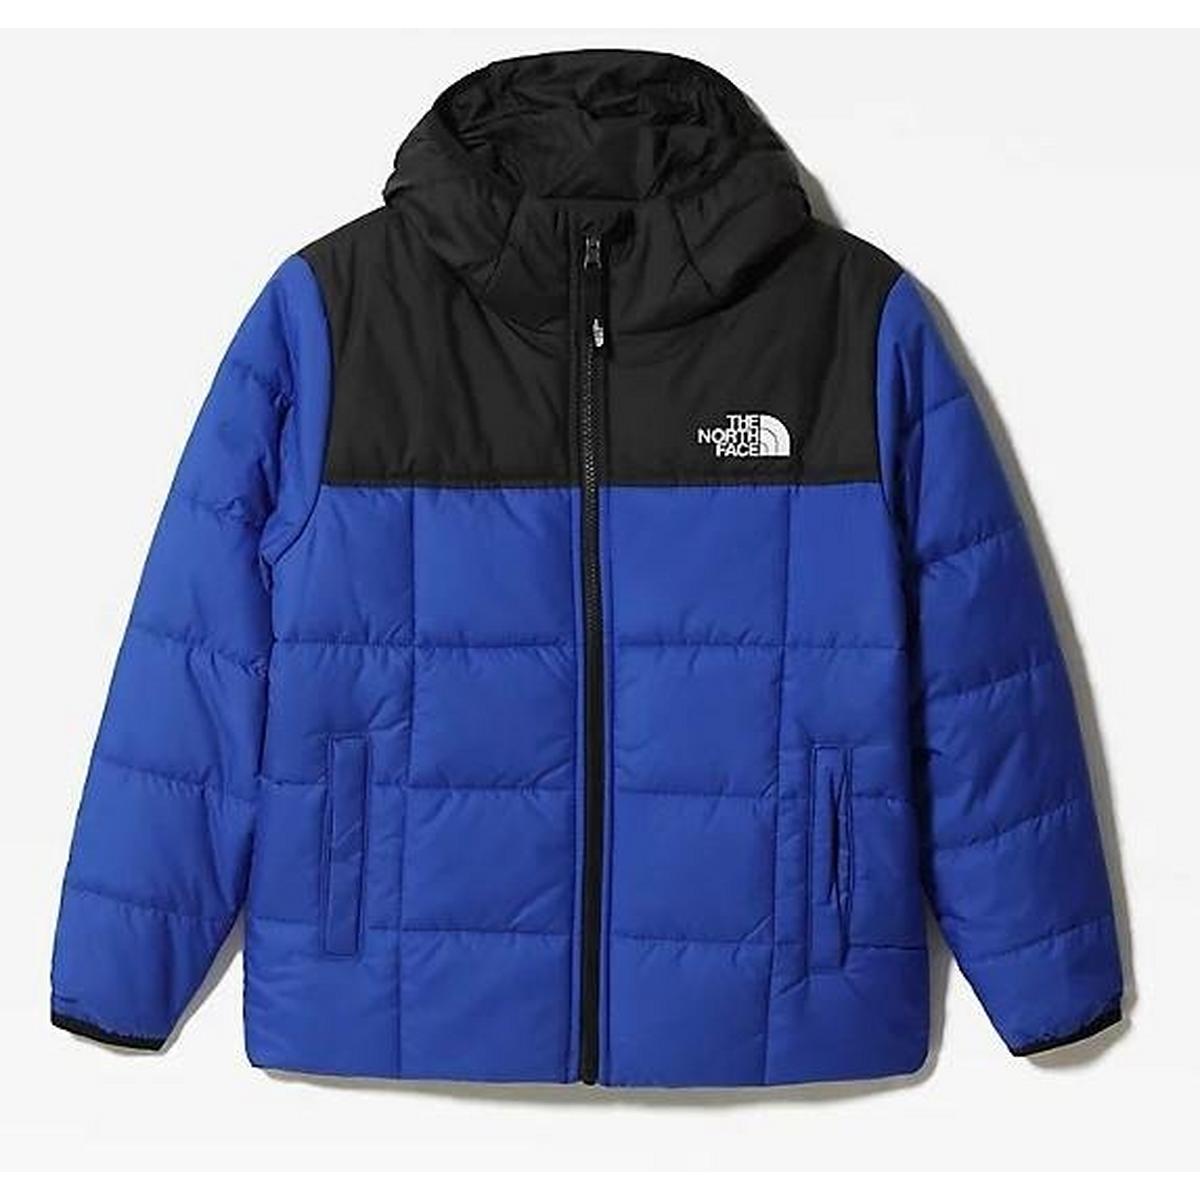 The North Face Kids' The North Face Reversible Perrito Jacket - Blue